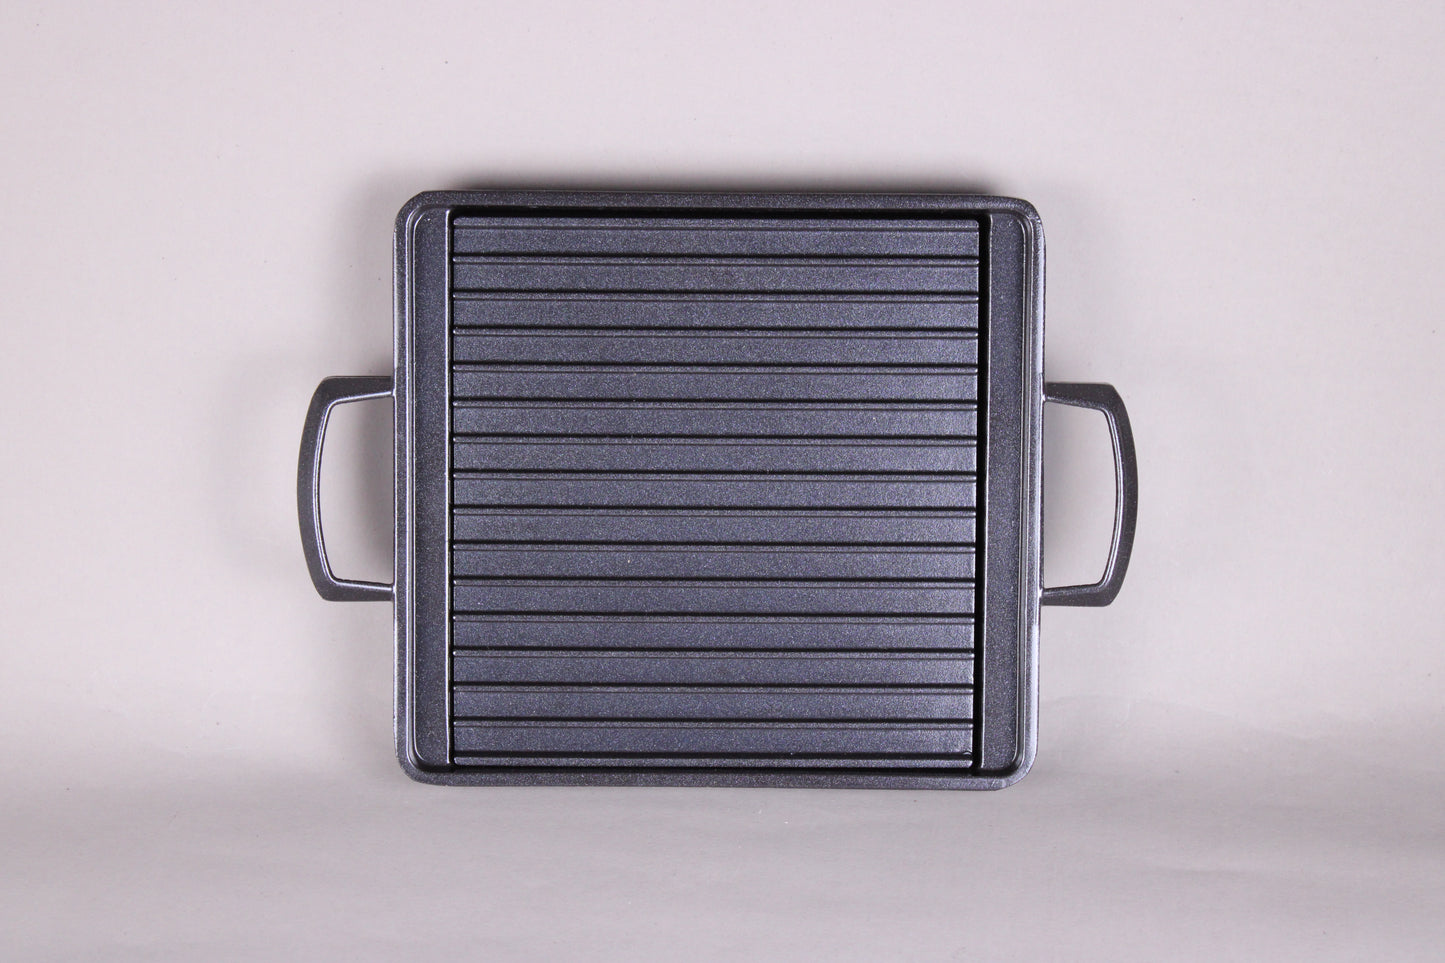 square black grill with 2 handles ridges and removable center plate shown with grey background 